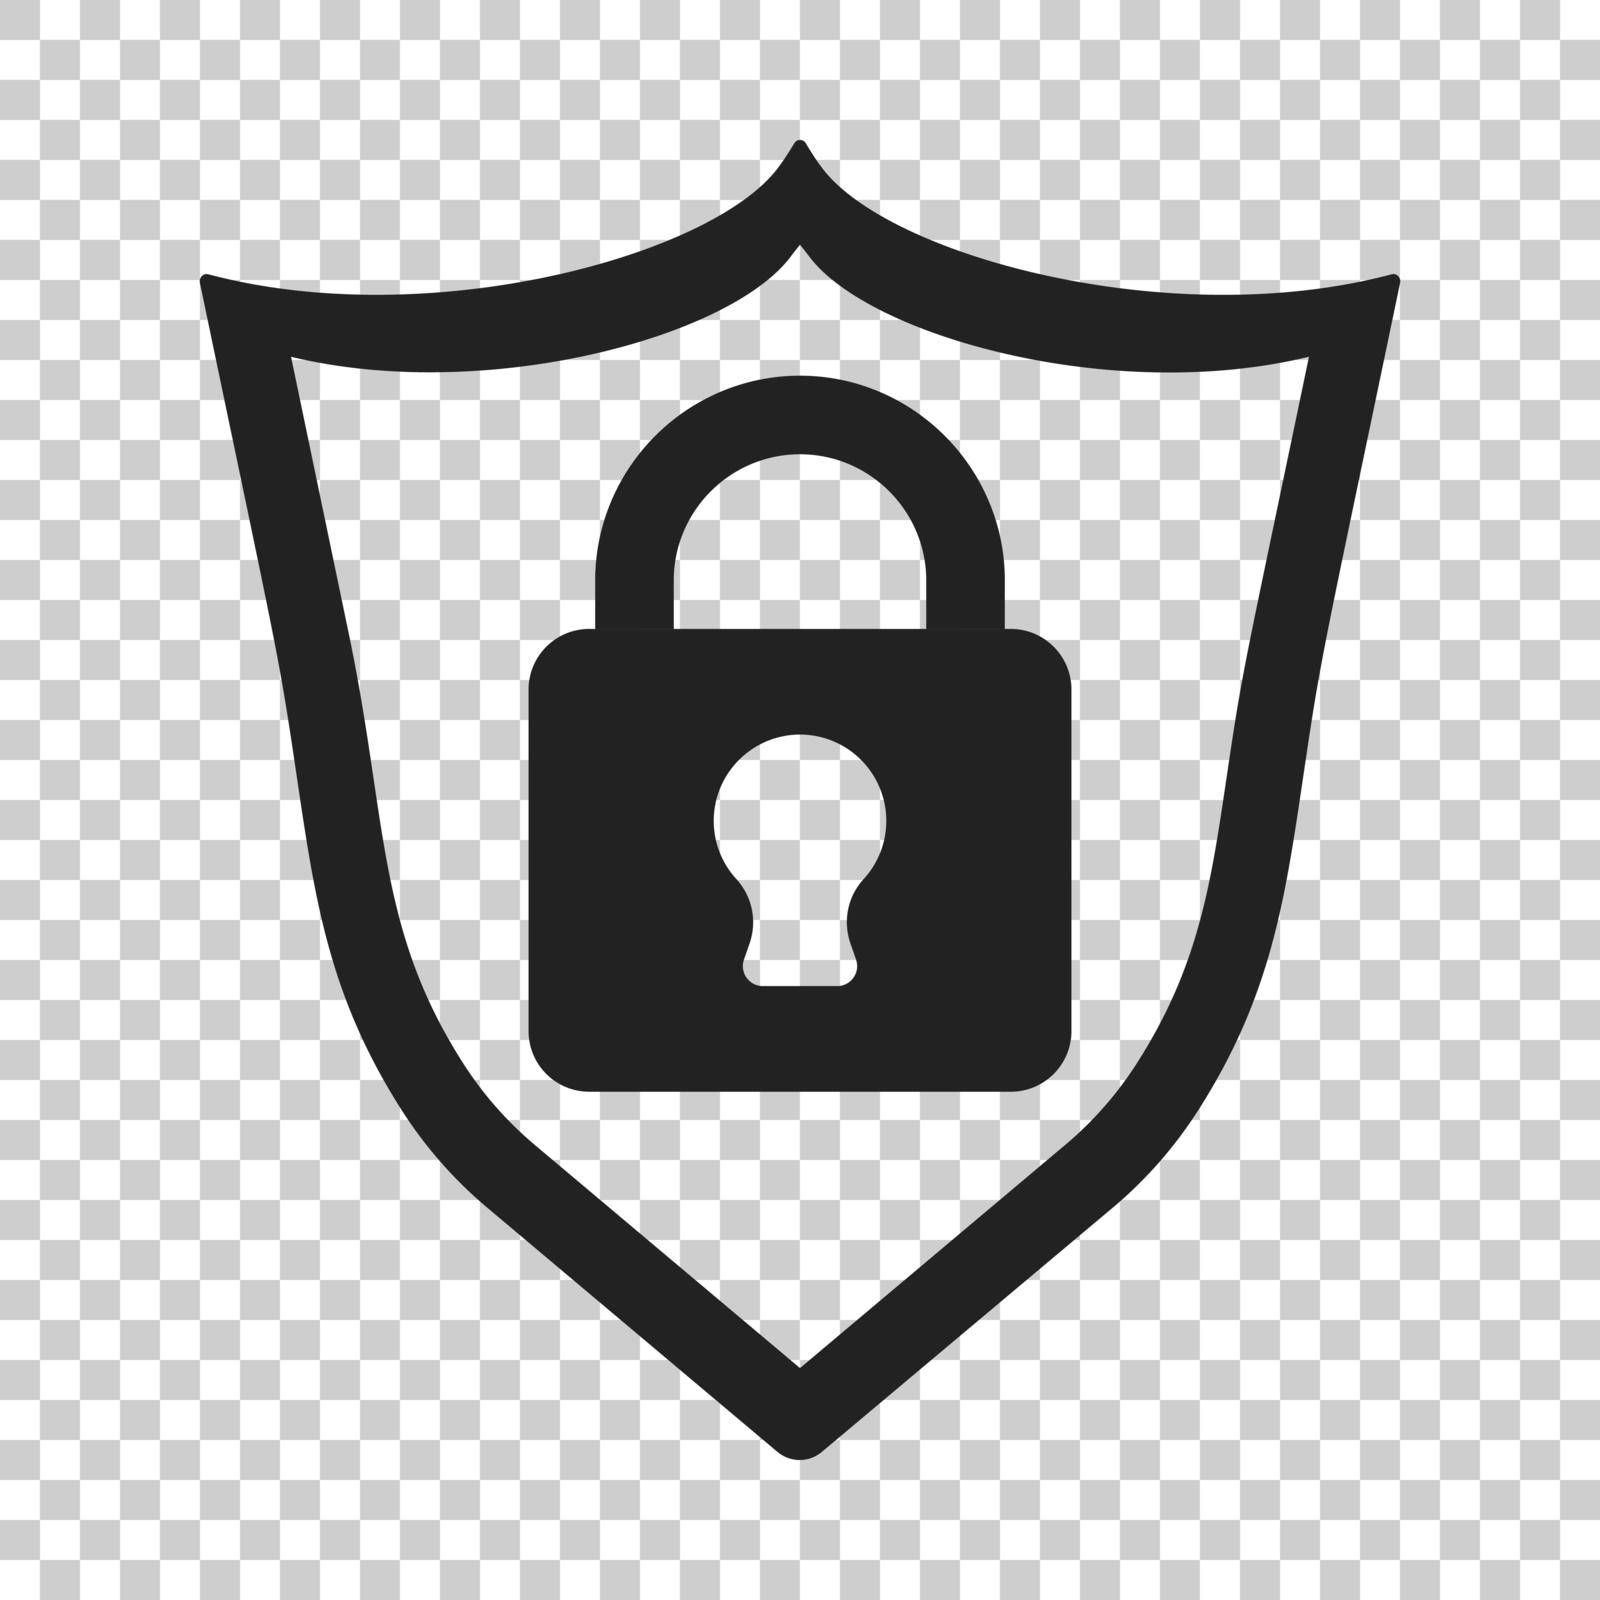 Lock with shield security icon. Vector illustration on isolated transparent background. Business concept padlock pictogram.